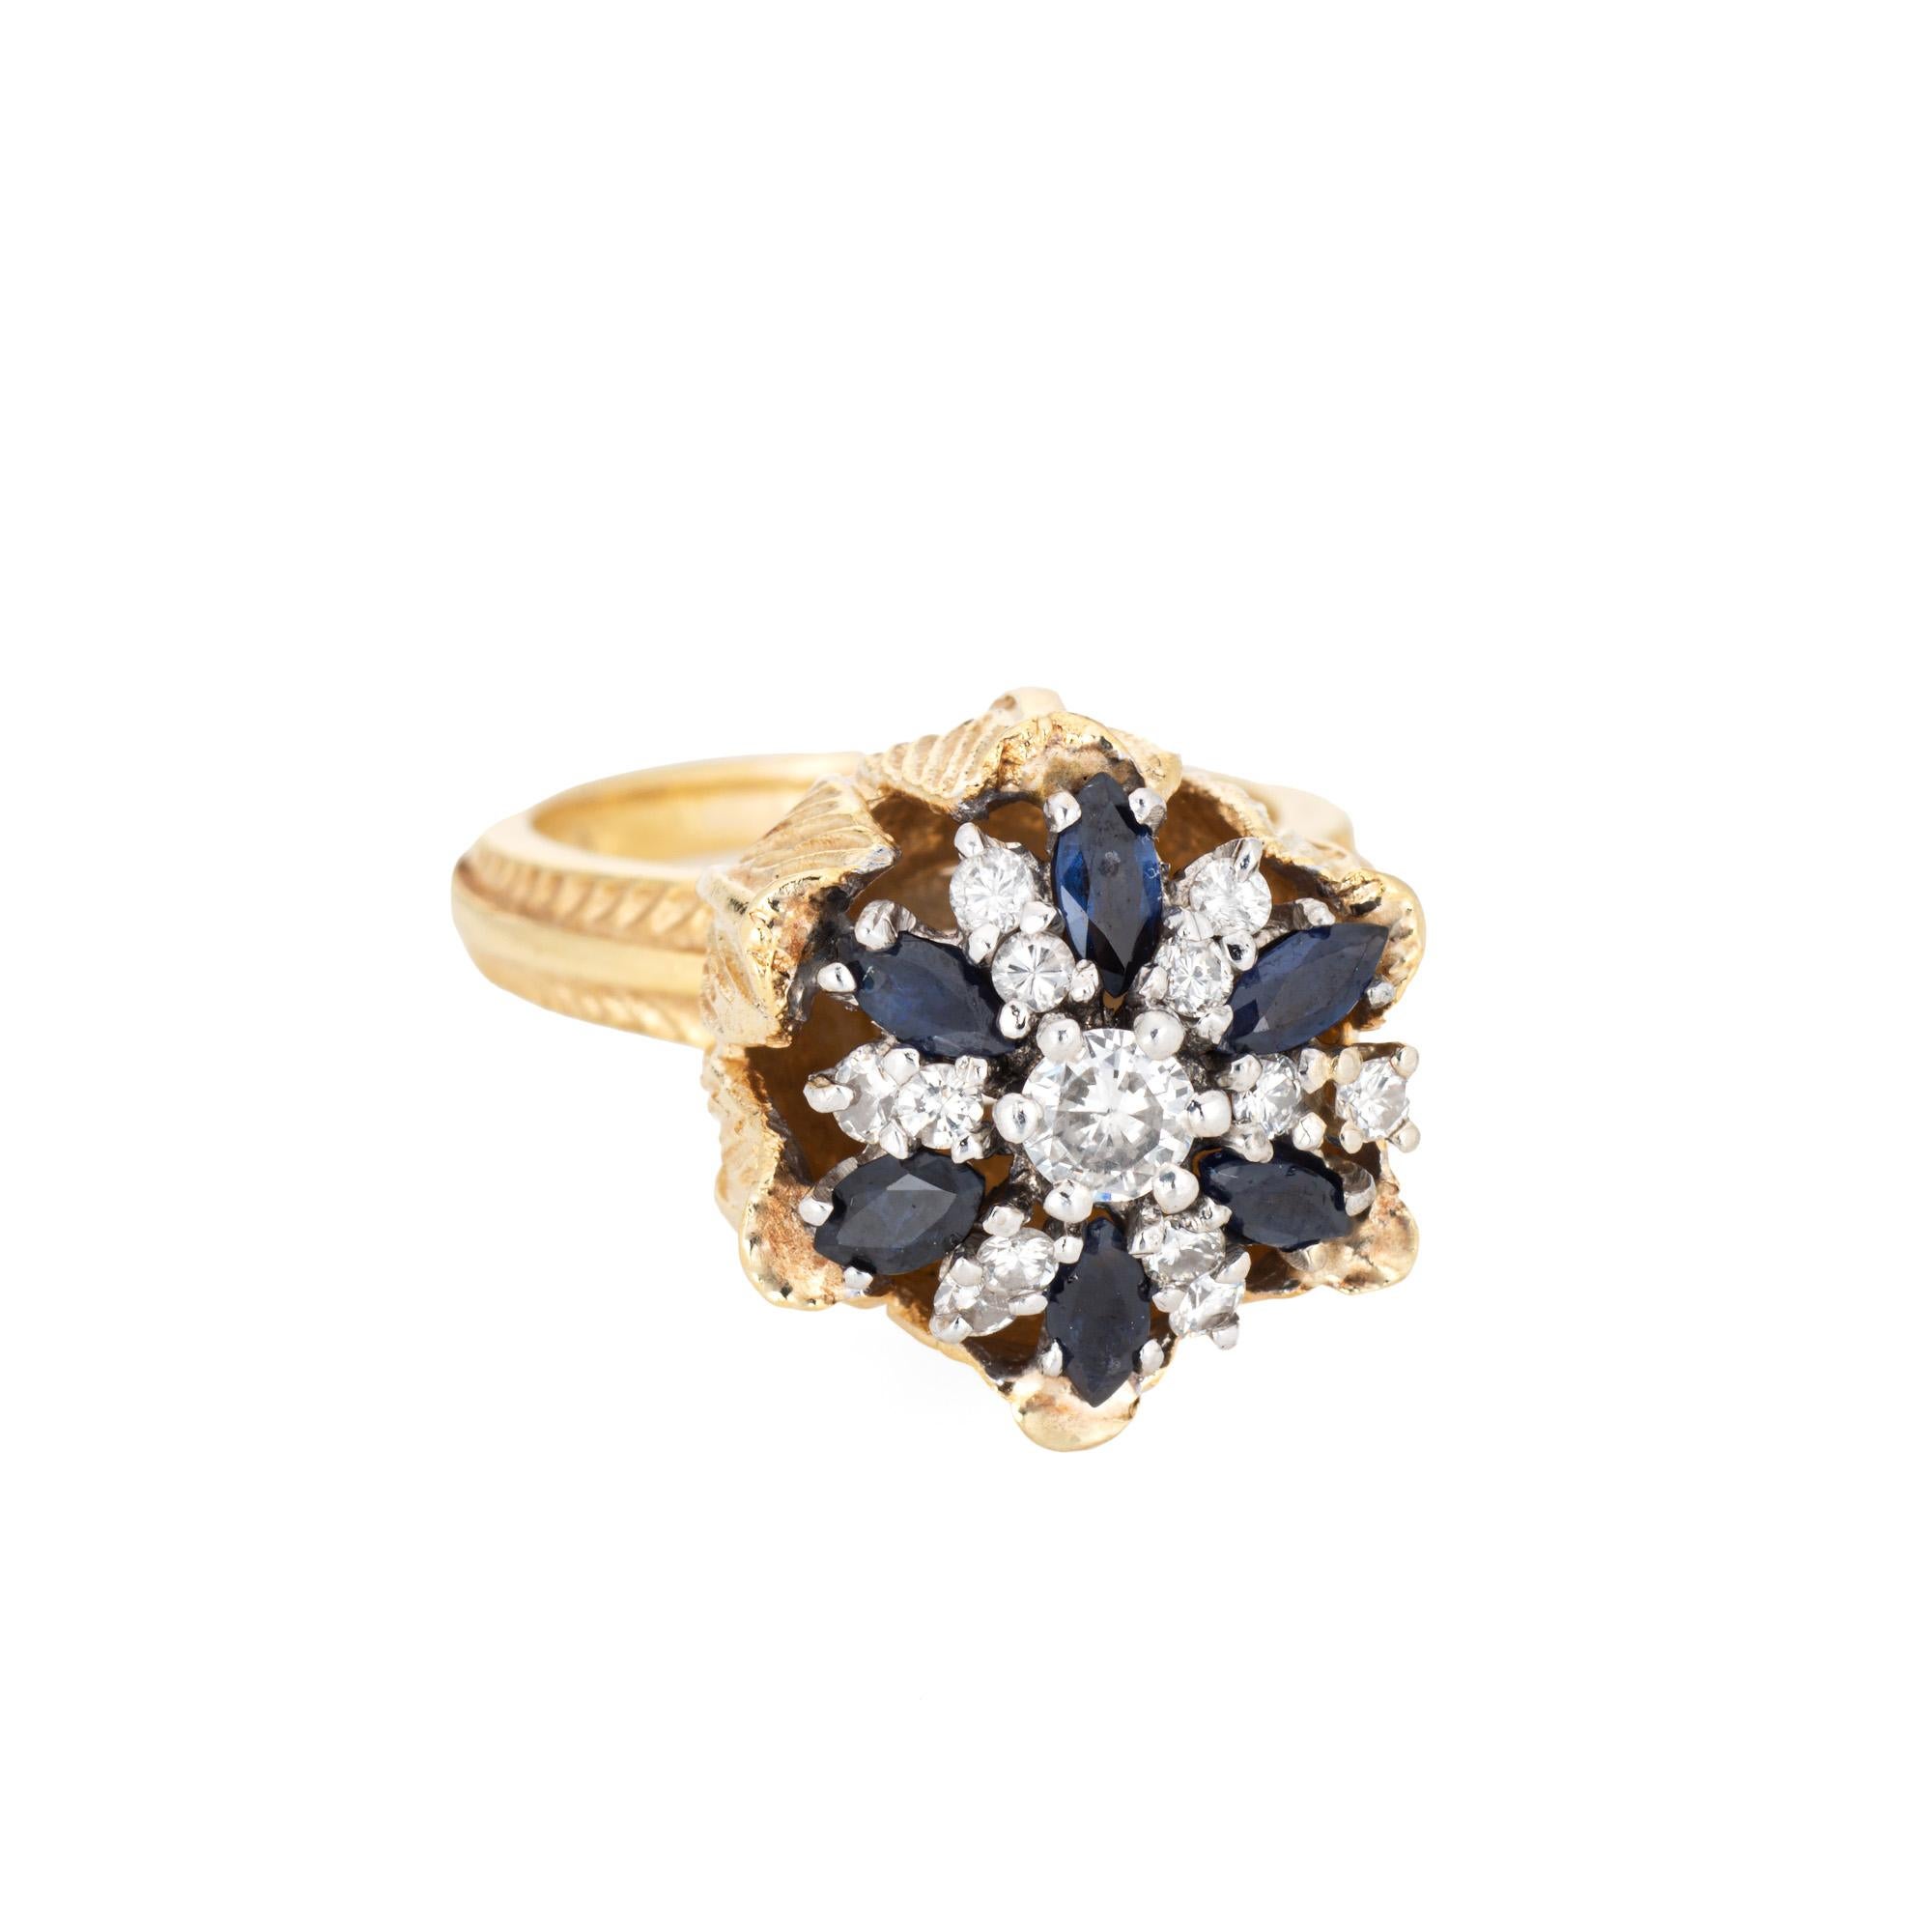 Stylish sapphire & diamond tulip ring crafted in 18 karat yellow gold (circa 1960s to 1970s). 

Round brilliant cut diamonds total an estimated 0.39 carats (estimated at H-I color and VS2-SI2 clarity). Marquise cut sapphire are estimated at 0.10